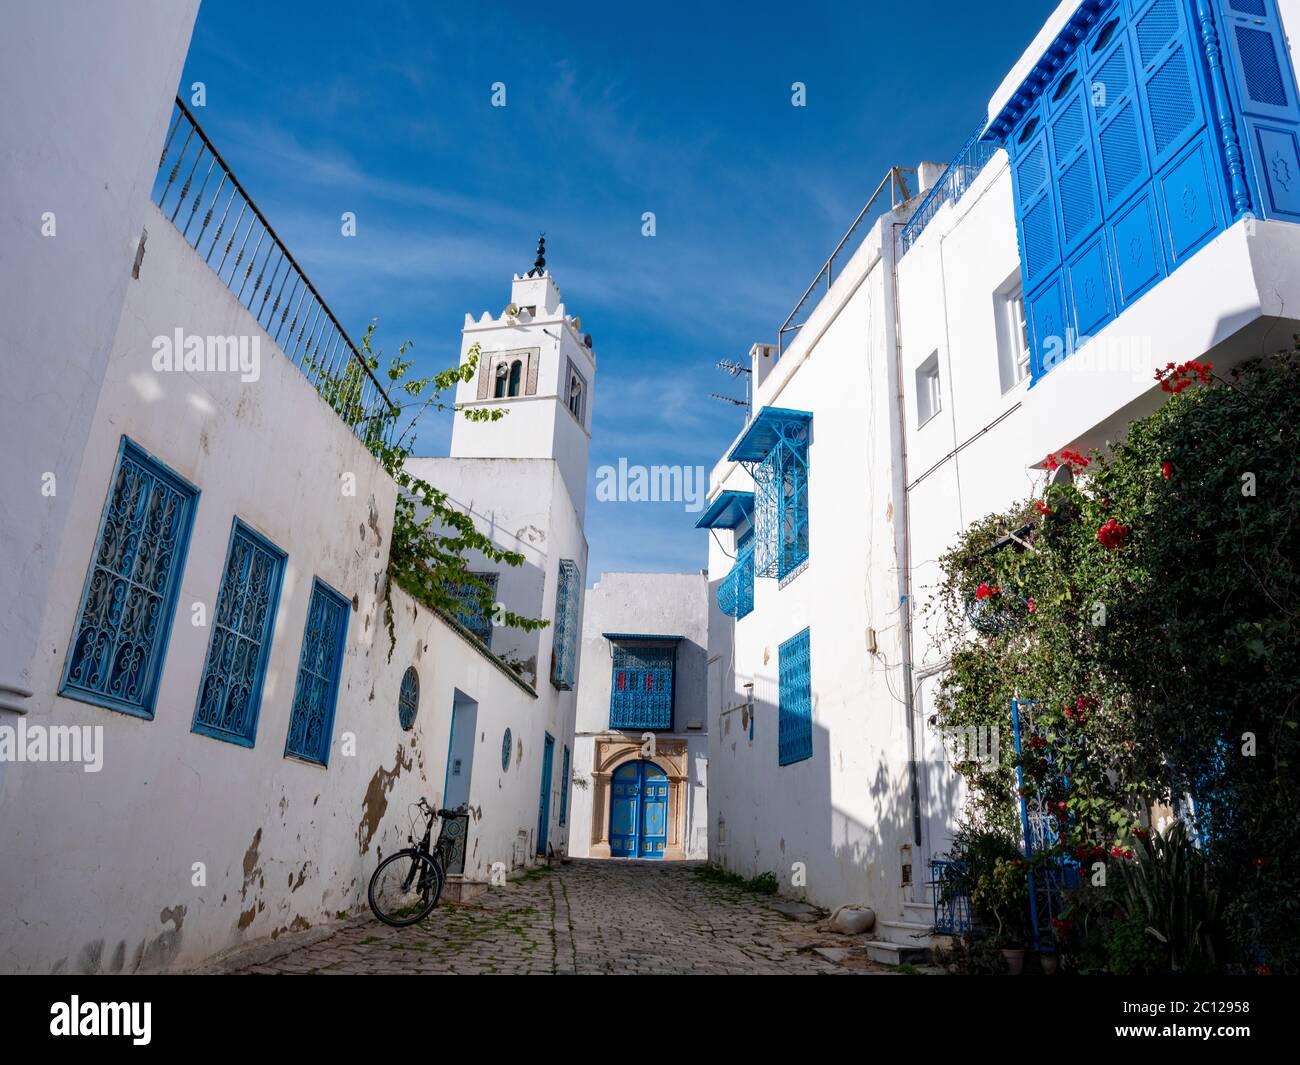 Street scene in the village of Sidi bou Said, Tunisia, known for its traditional use of blue and white colors on the facades of buildings. Stock Photo